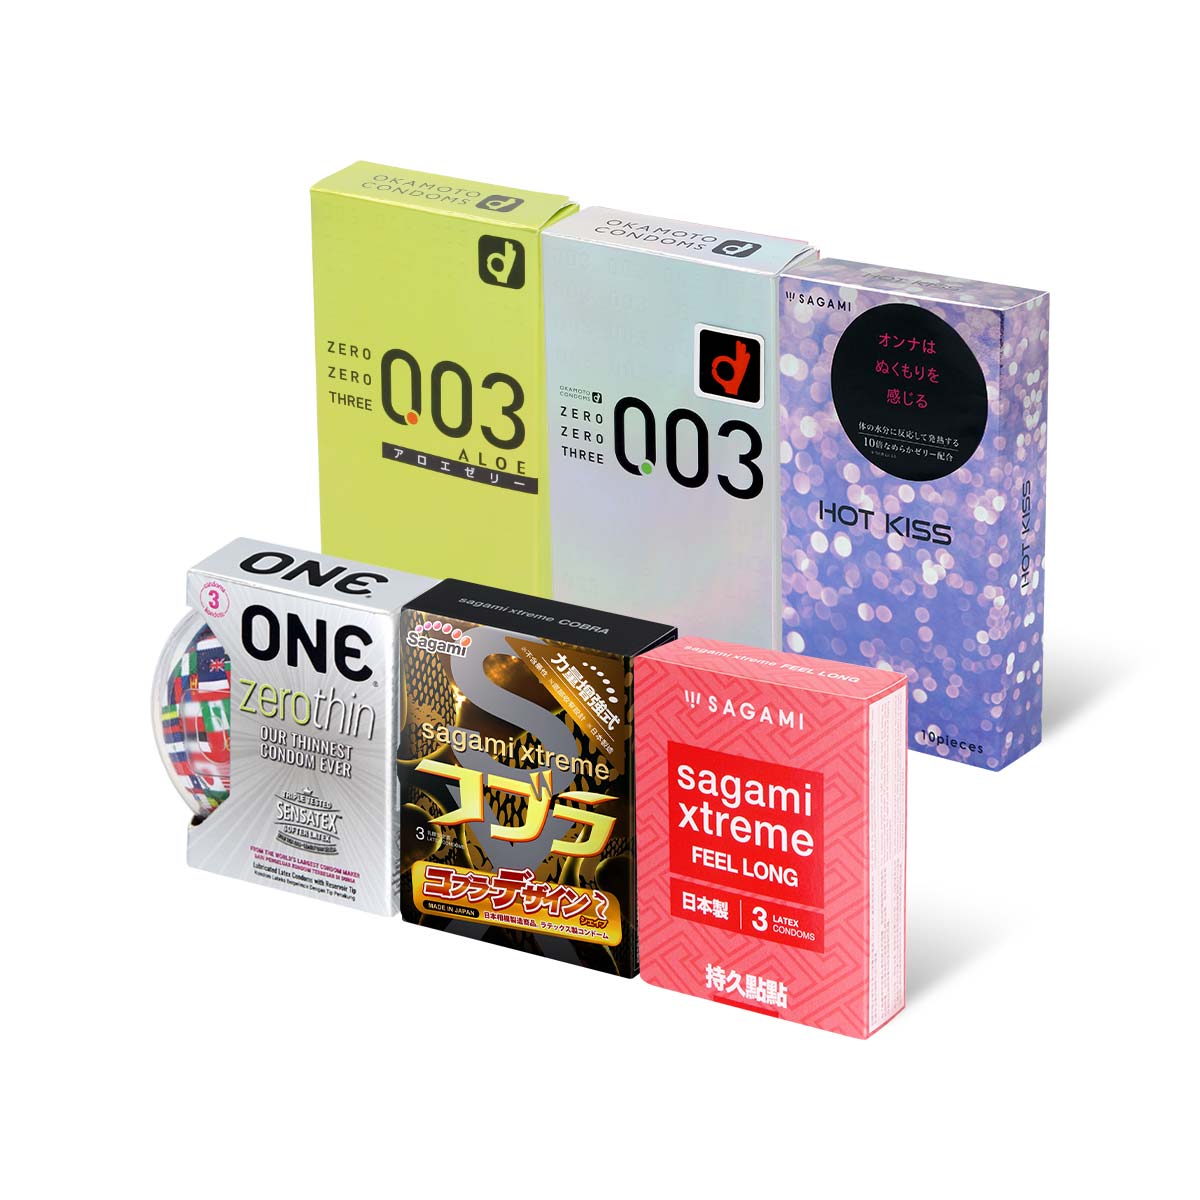 Sampson Recommended Value Type Combo Set 41 pieces condom-p_1